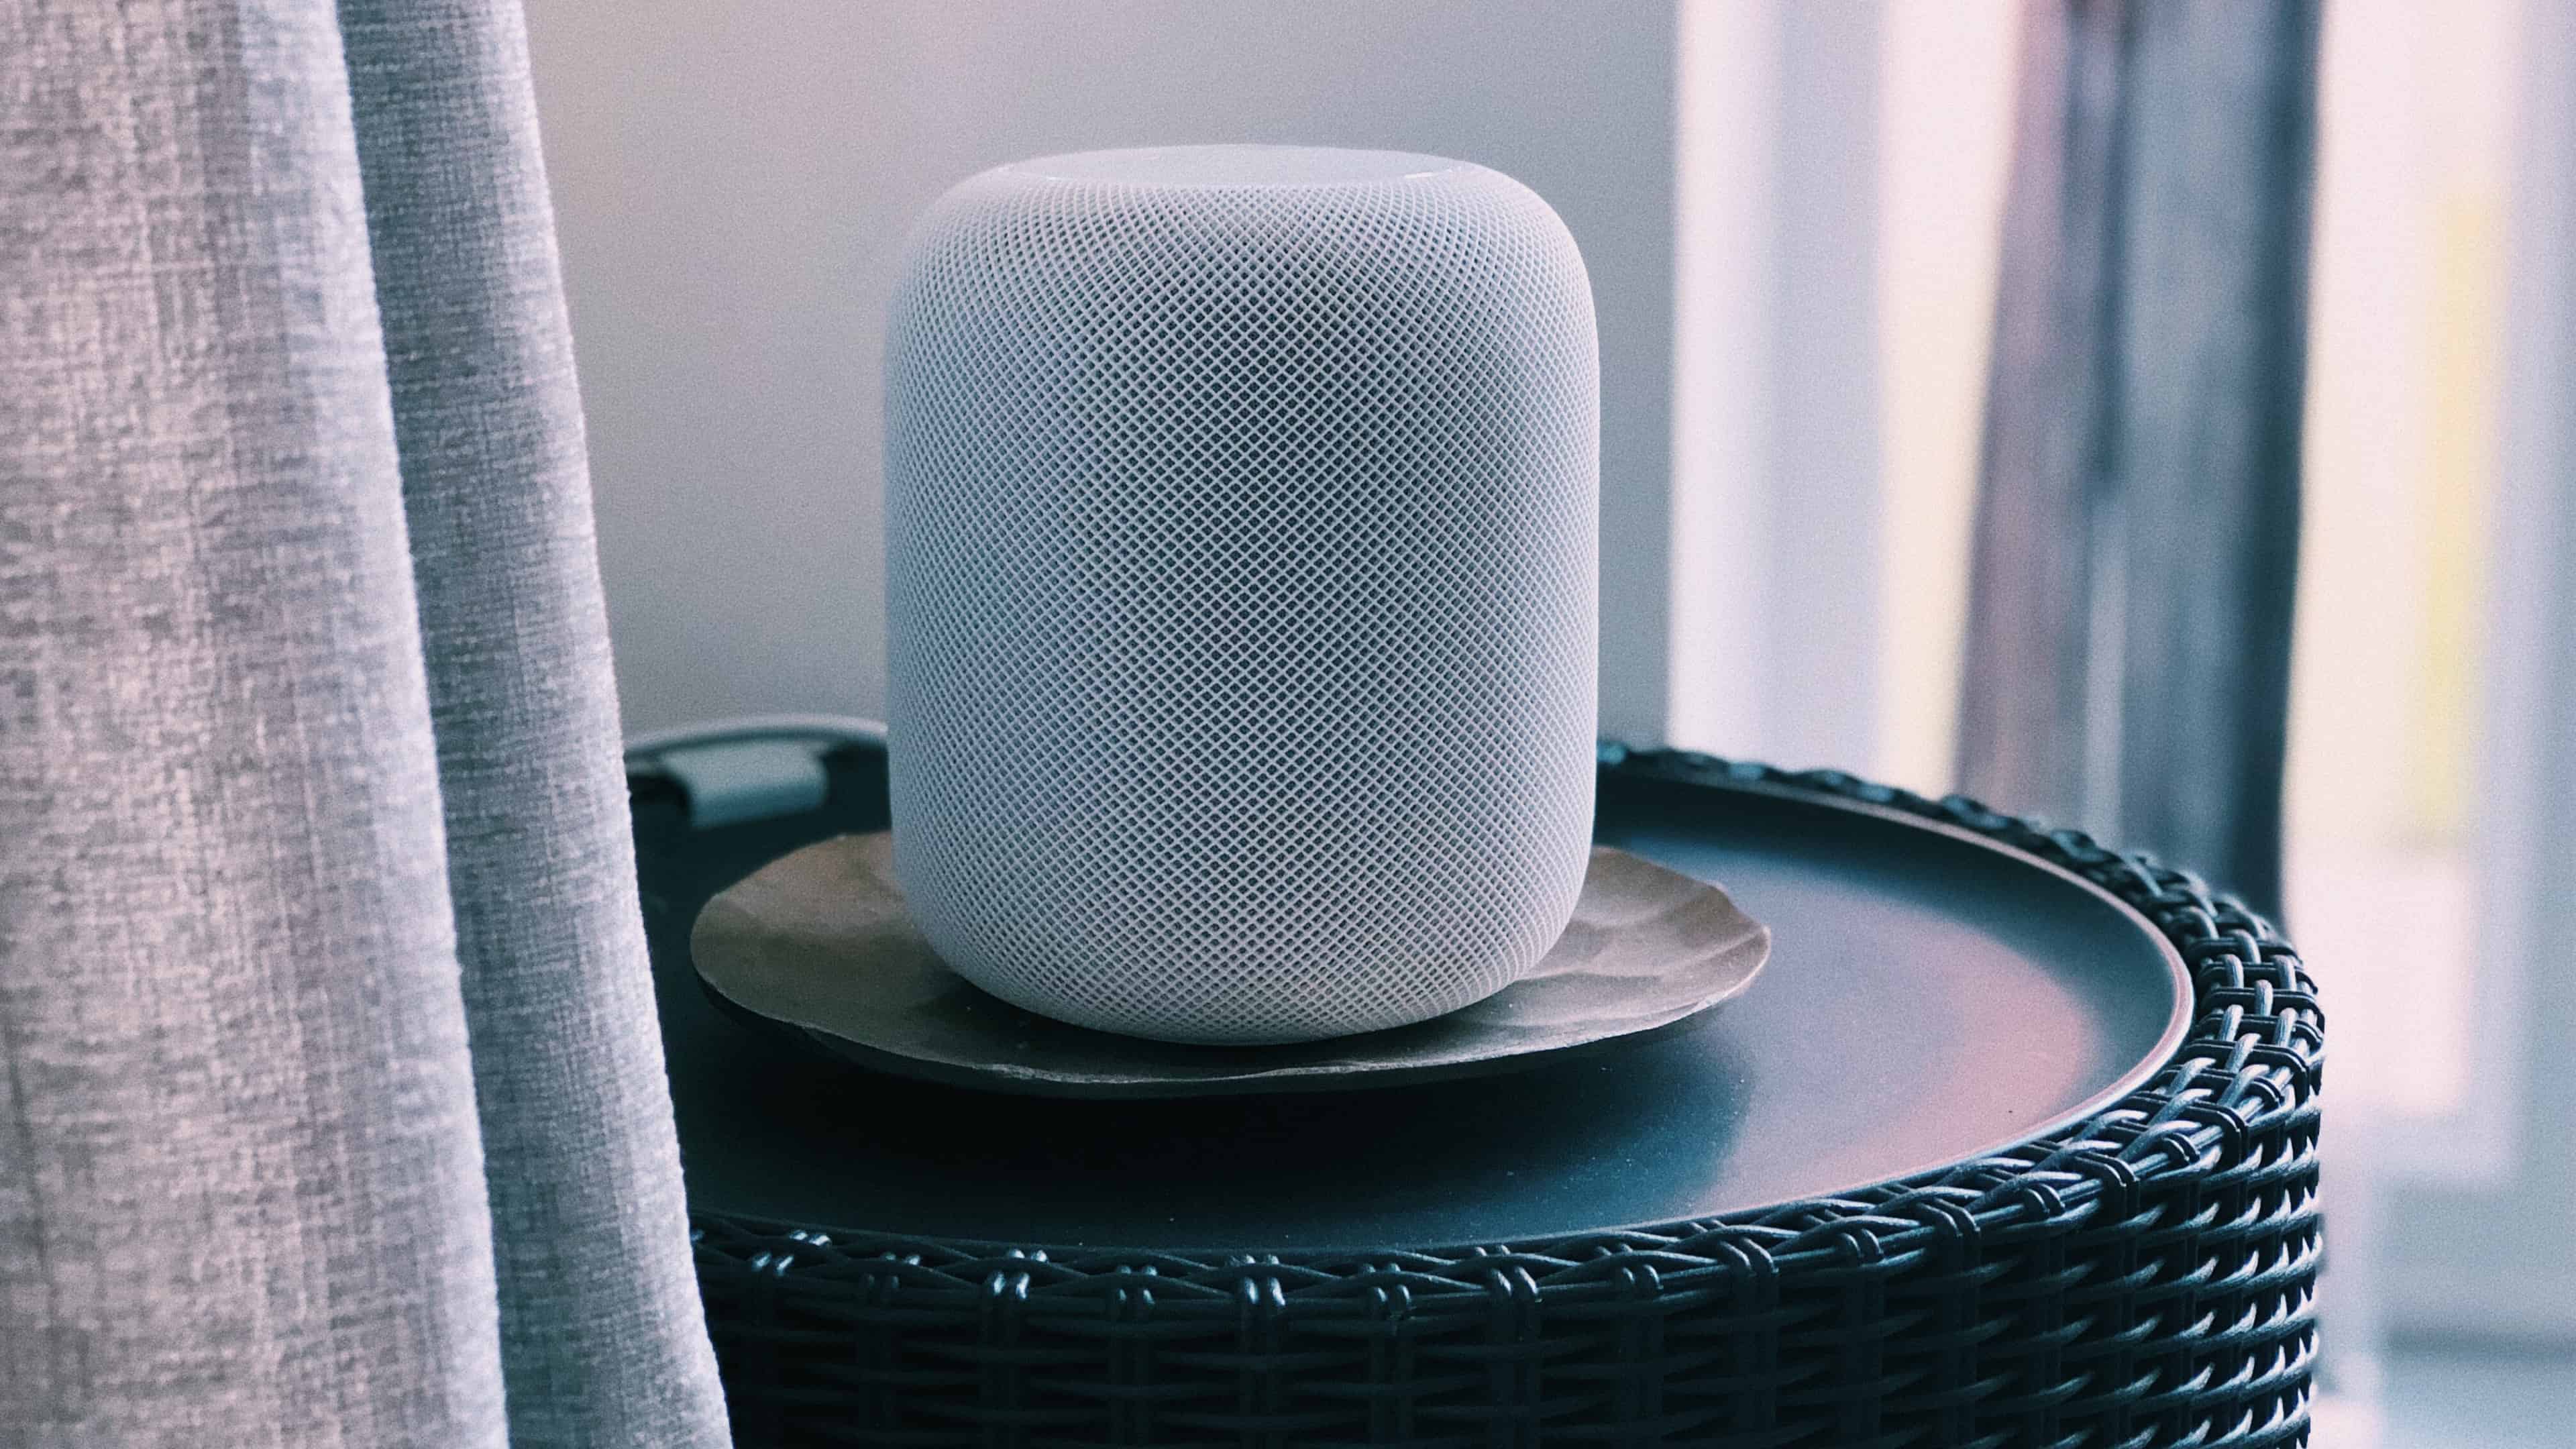 A silver version of Apple's full-size HomePod wireless speaker is shown sitting on a table in this photo from Unsplash